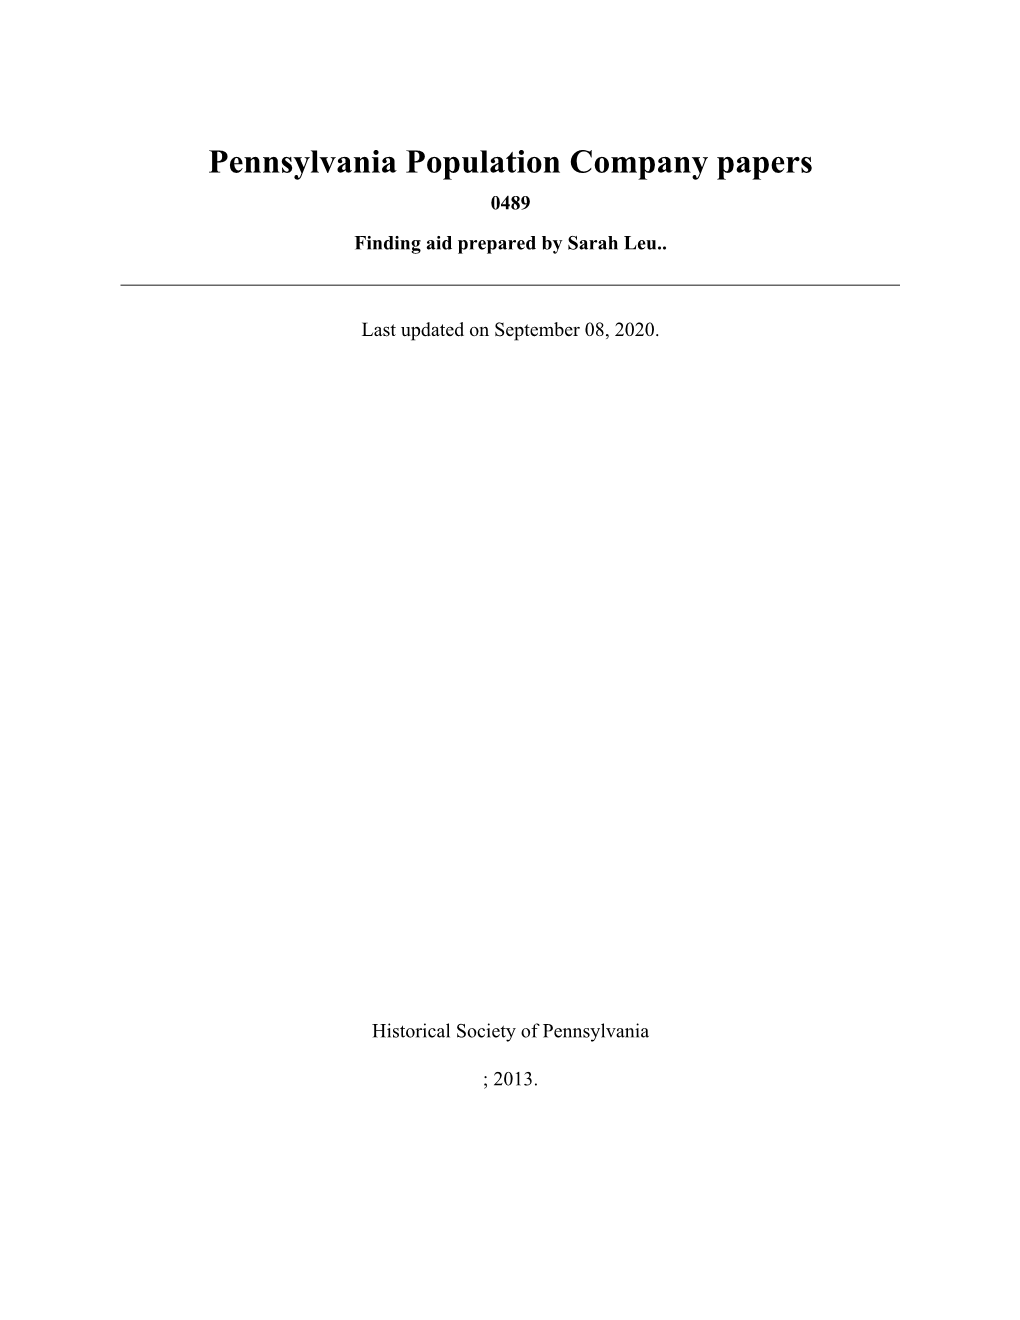 Pennsylvania Population Company Papers 0489 Finding Aid Prepared by Sarah Leu